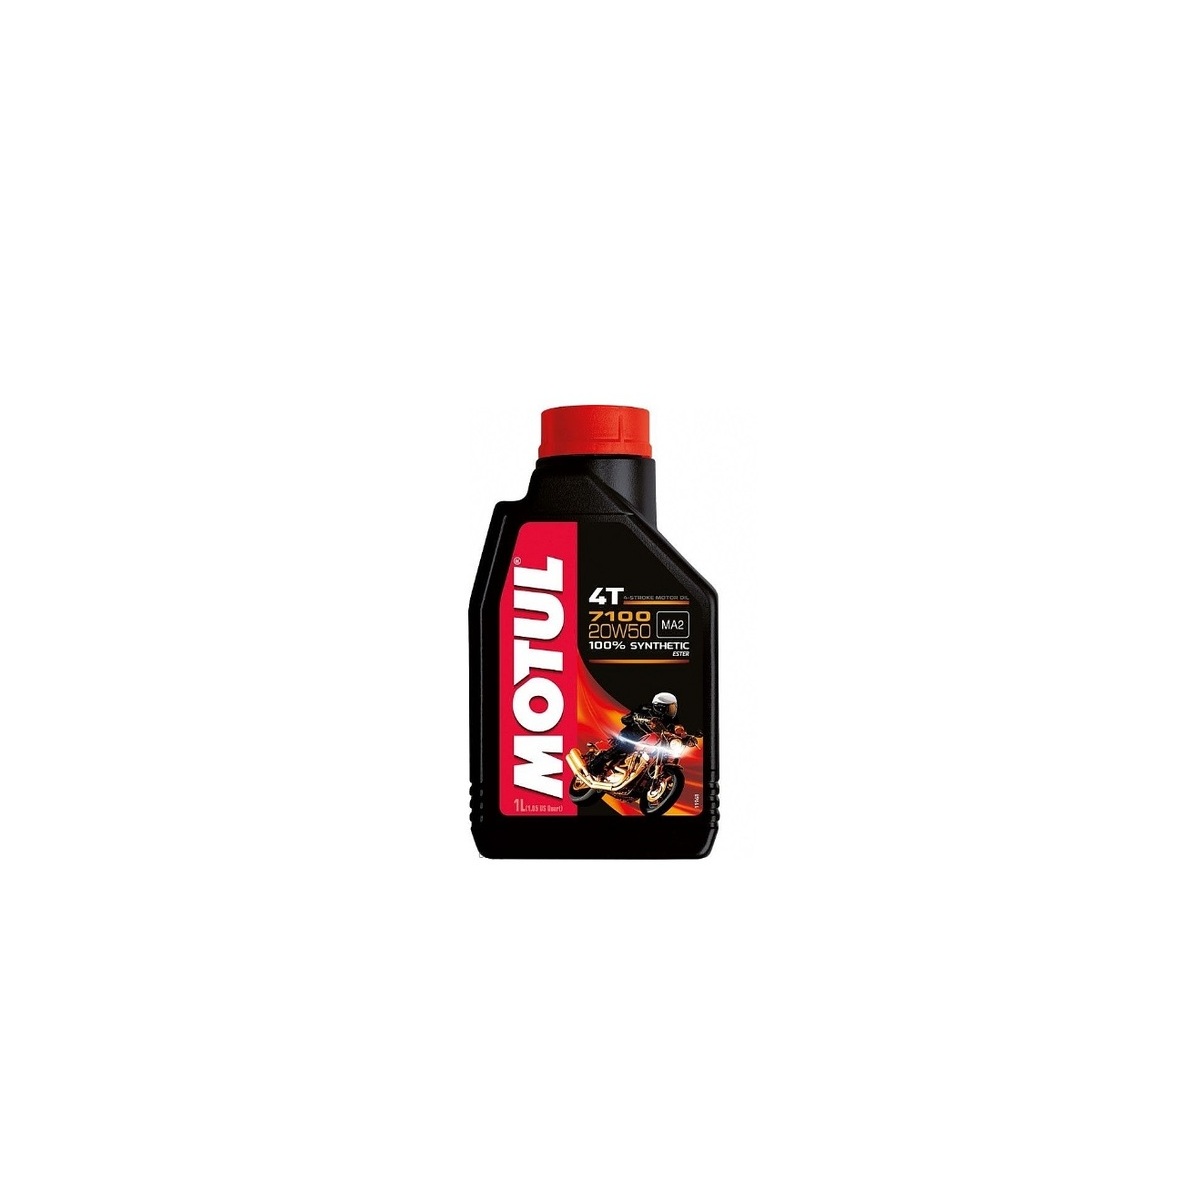 <span style="font-weight: bold;">Масло моторное MOTUL 7100 20W-50 4Т, 1 л.</span><br>